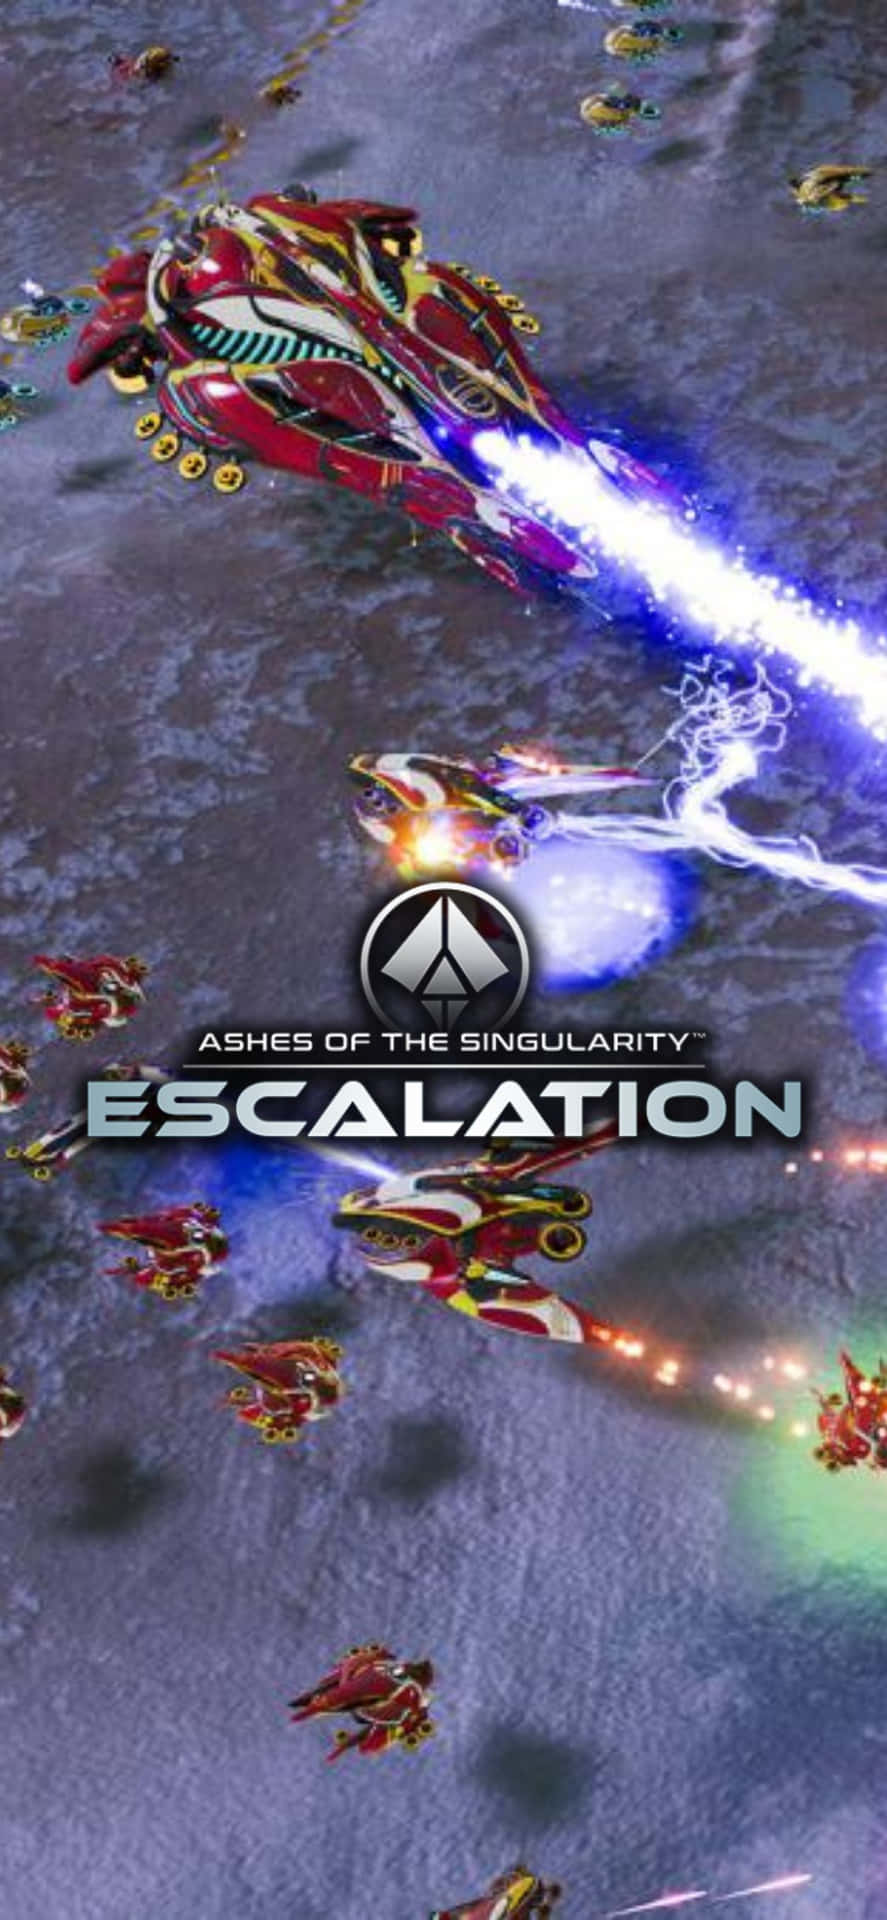 Immerse Yourself in Ashes of the Singularity Escalation on iPhone X